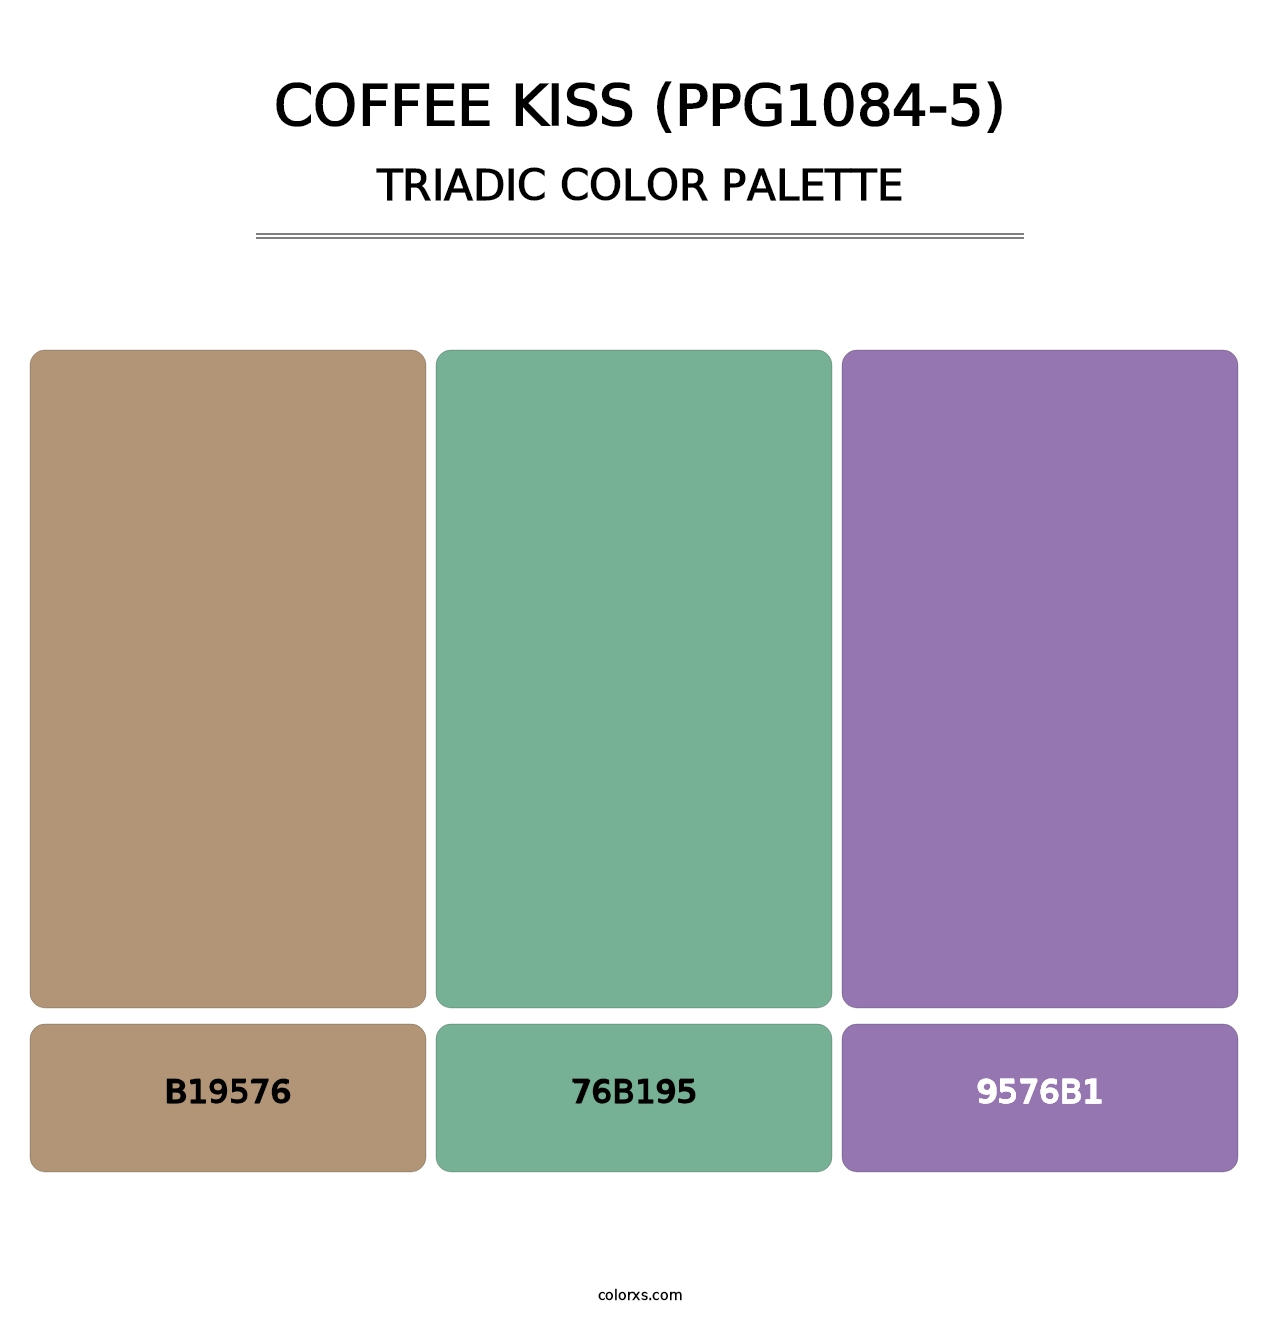 Coffee Kiss (PPG1084-5) - Triadic Color Palette